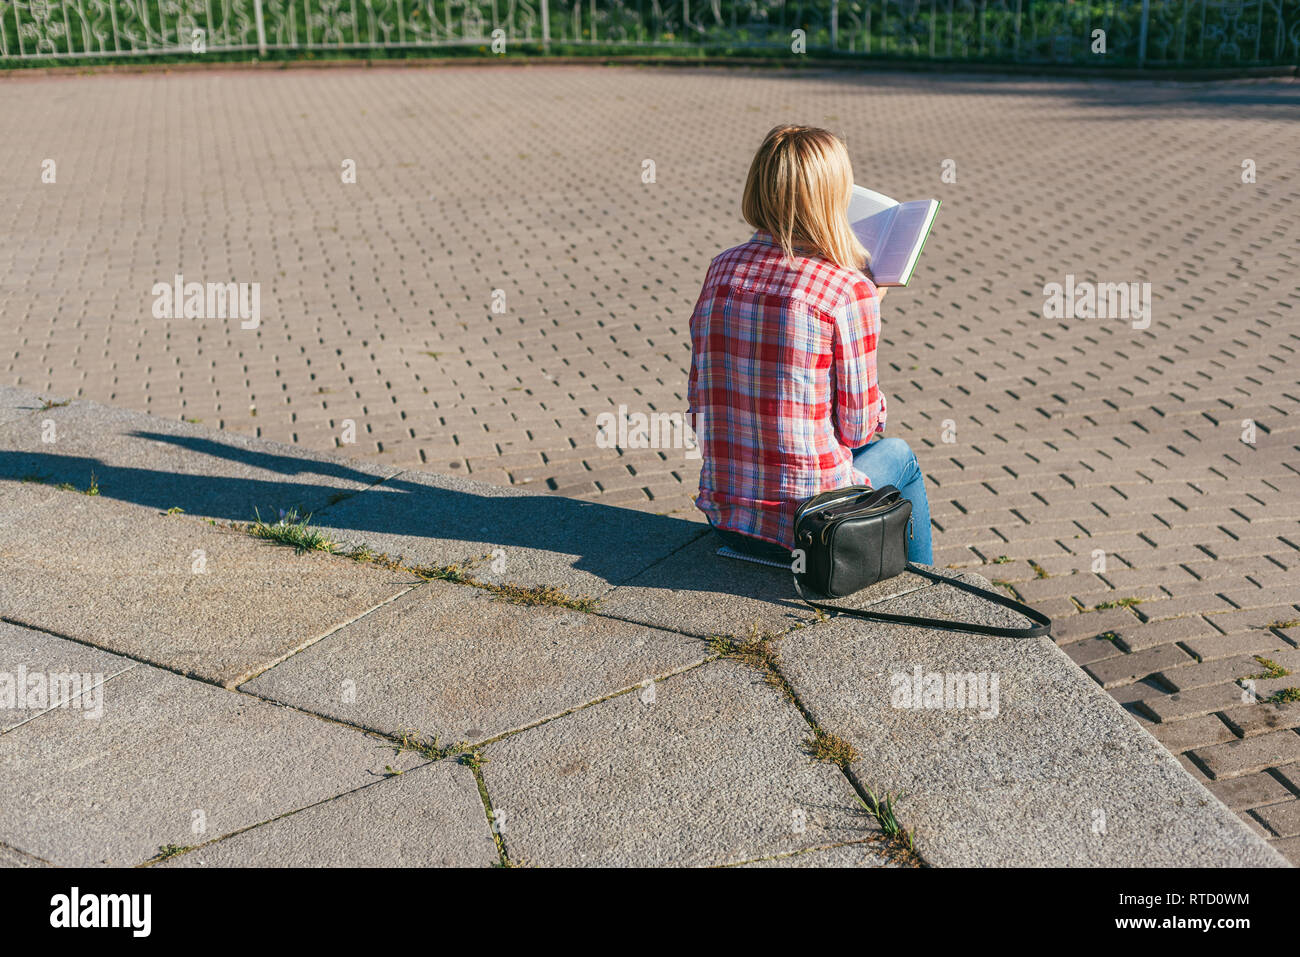 Blond girl in a red checkered shirt is sitting on a stone step and reading a book. Next to her is a black leather handbag. Bright, warm, spring day Stock Photo